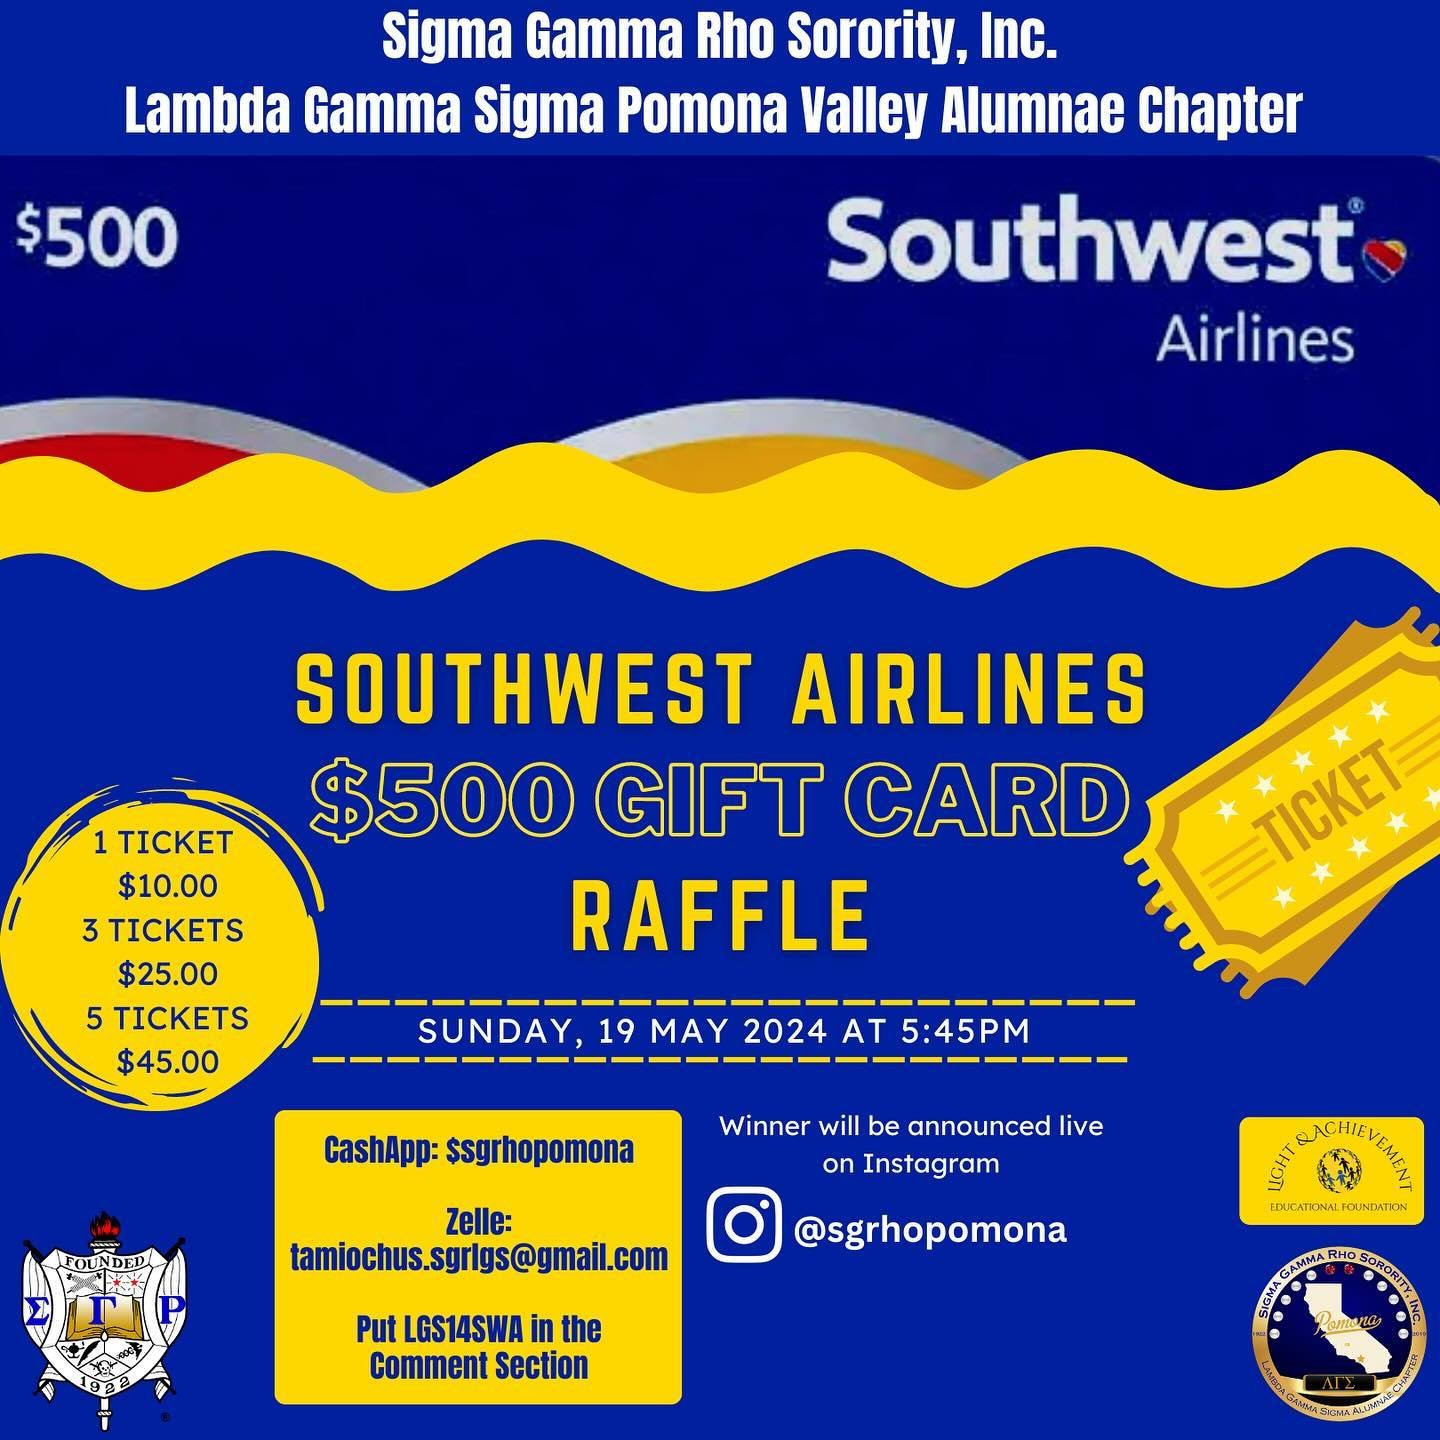 The Legendary Ladies of Lambda Gamma Sigma Alumnae Chapter of Sigma Gamma Rho Sorority, Inc. would like to present two exciting raffle opportunities that are open for attendees of our 14th Anniversary Gold and Ivory Day Party and LGS supporters. We w